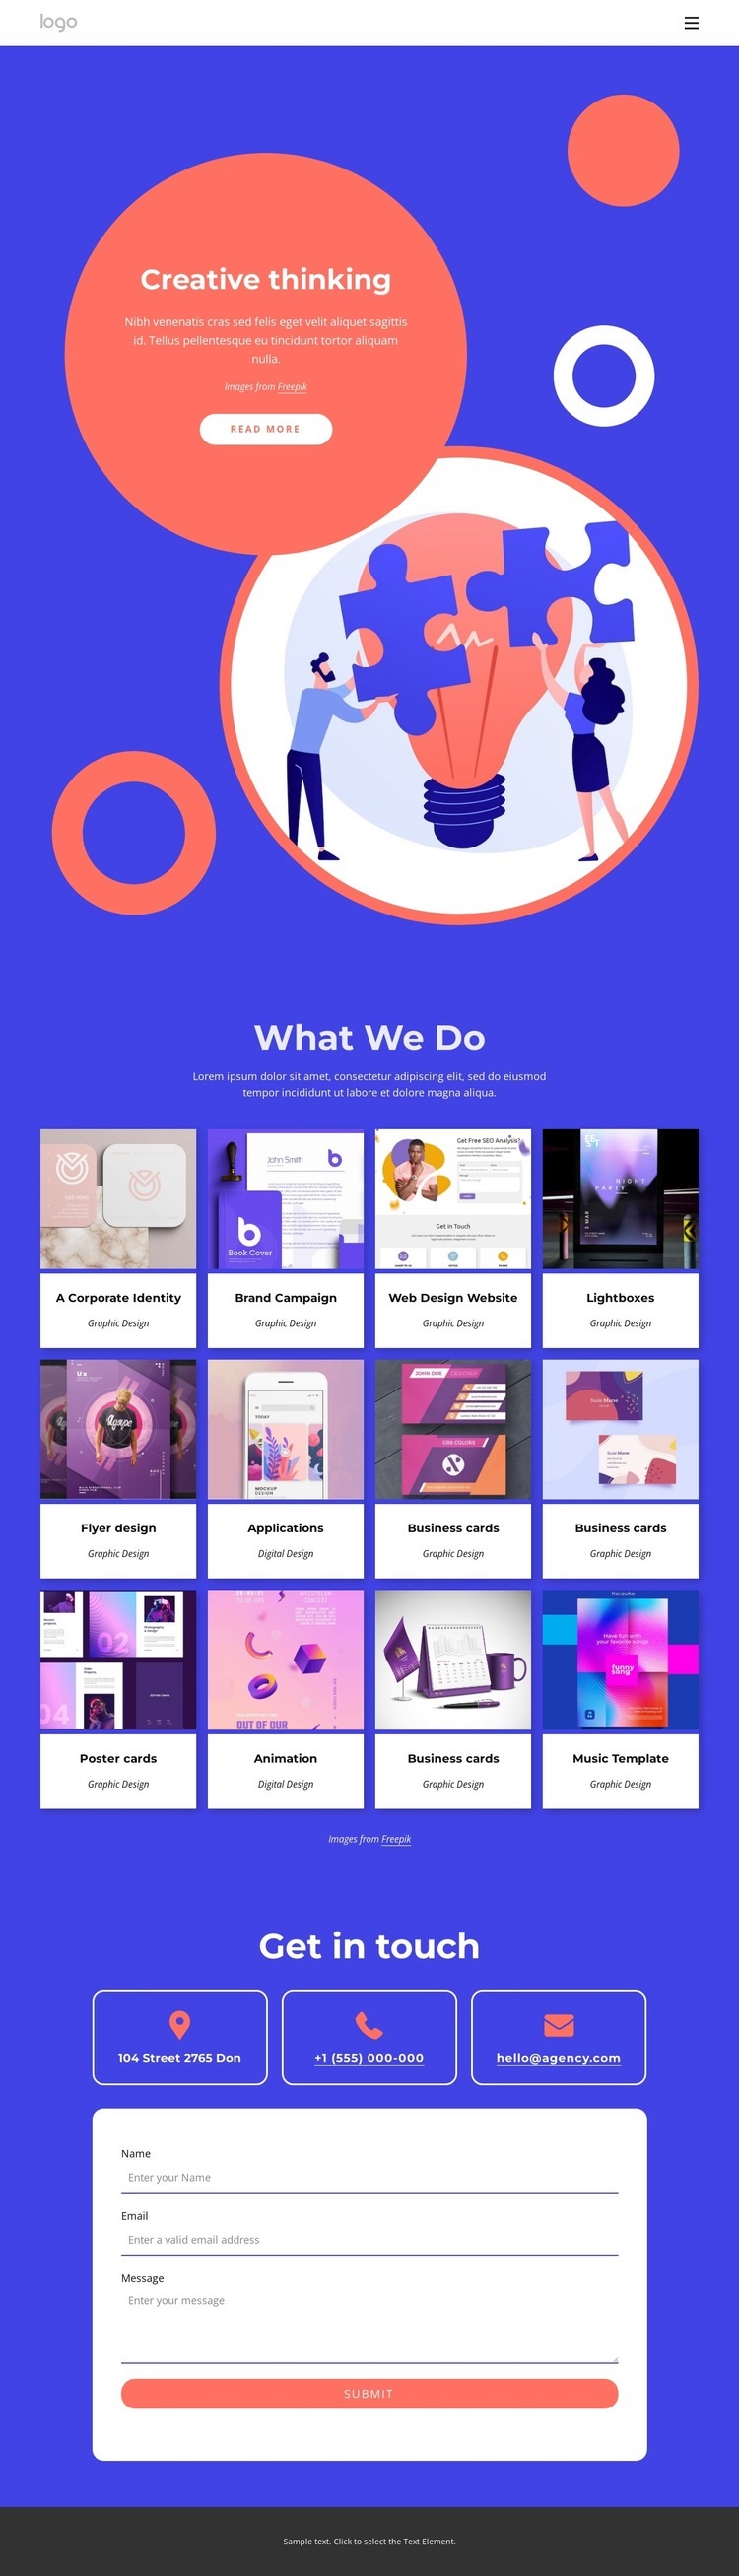 Campaigns, mobile and digital Squarespace Template Alternative